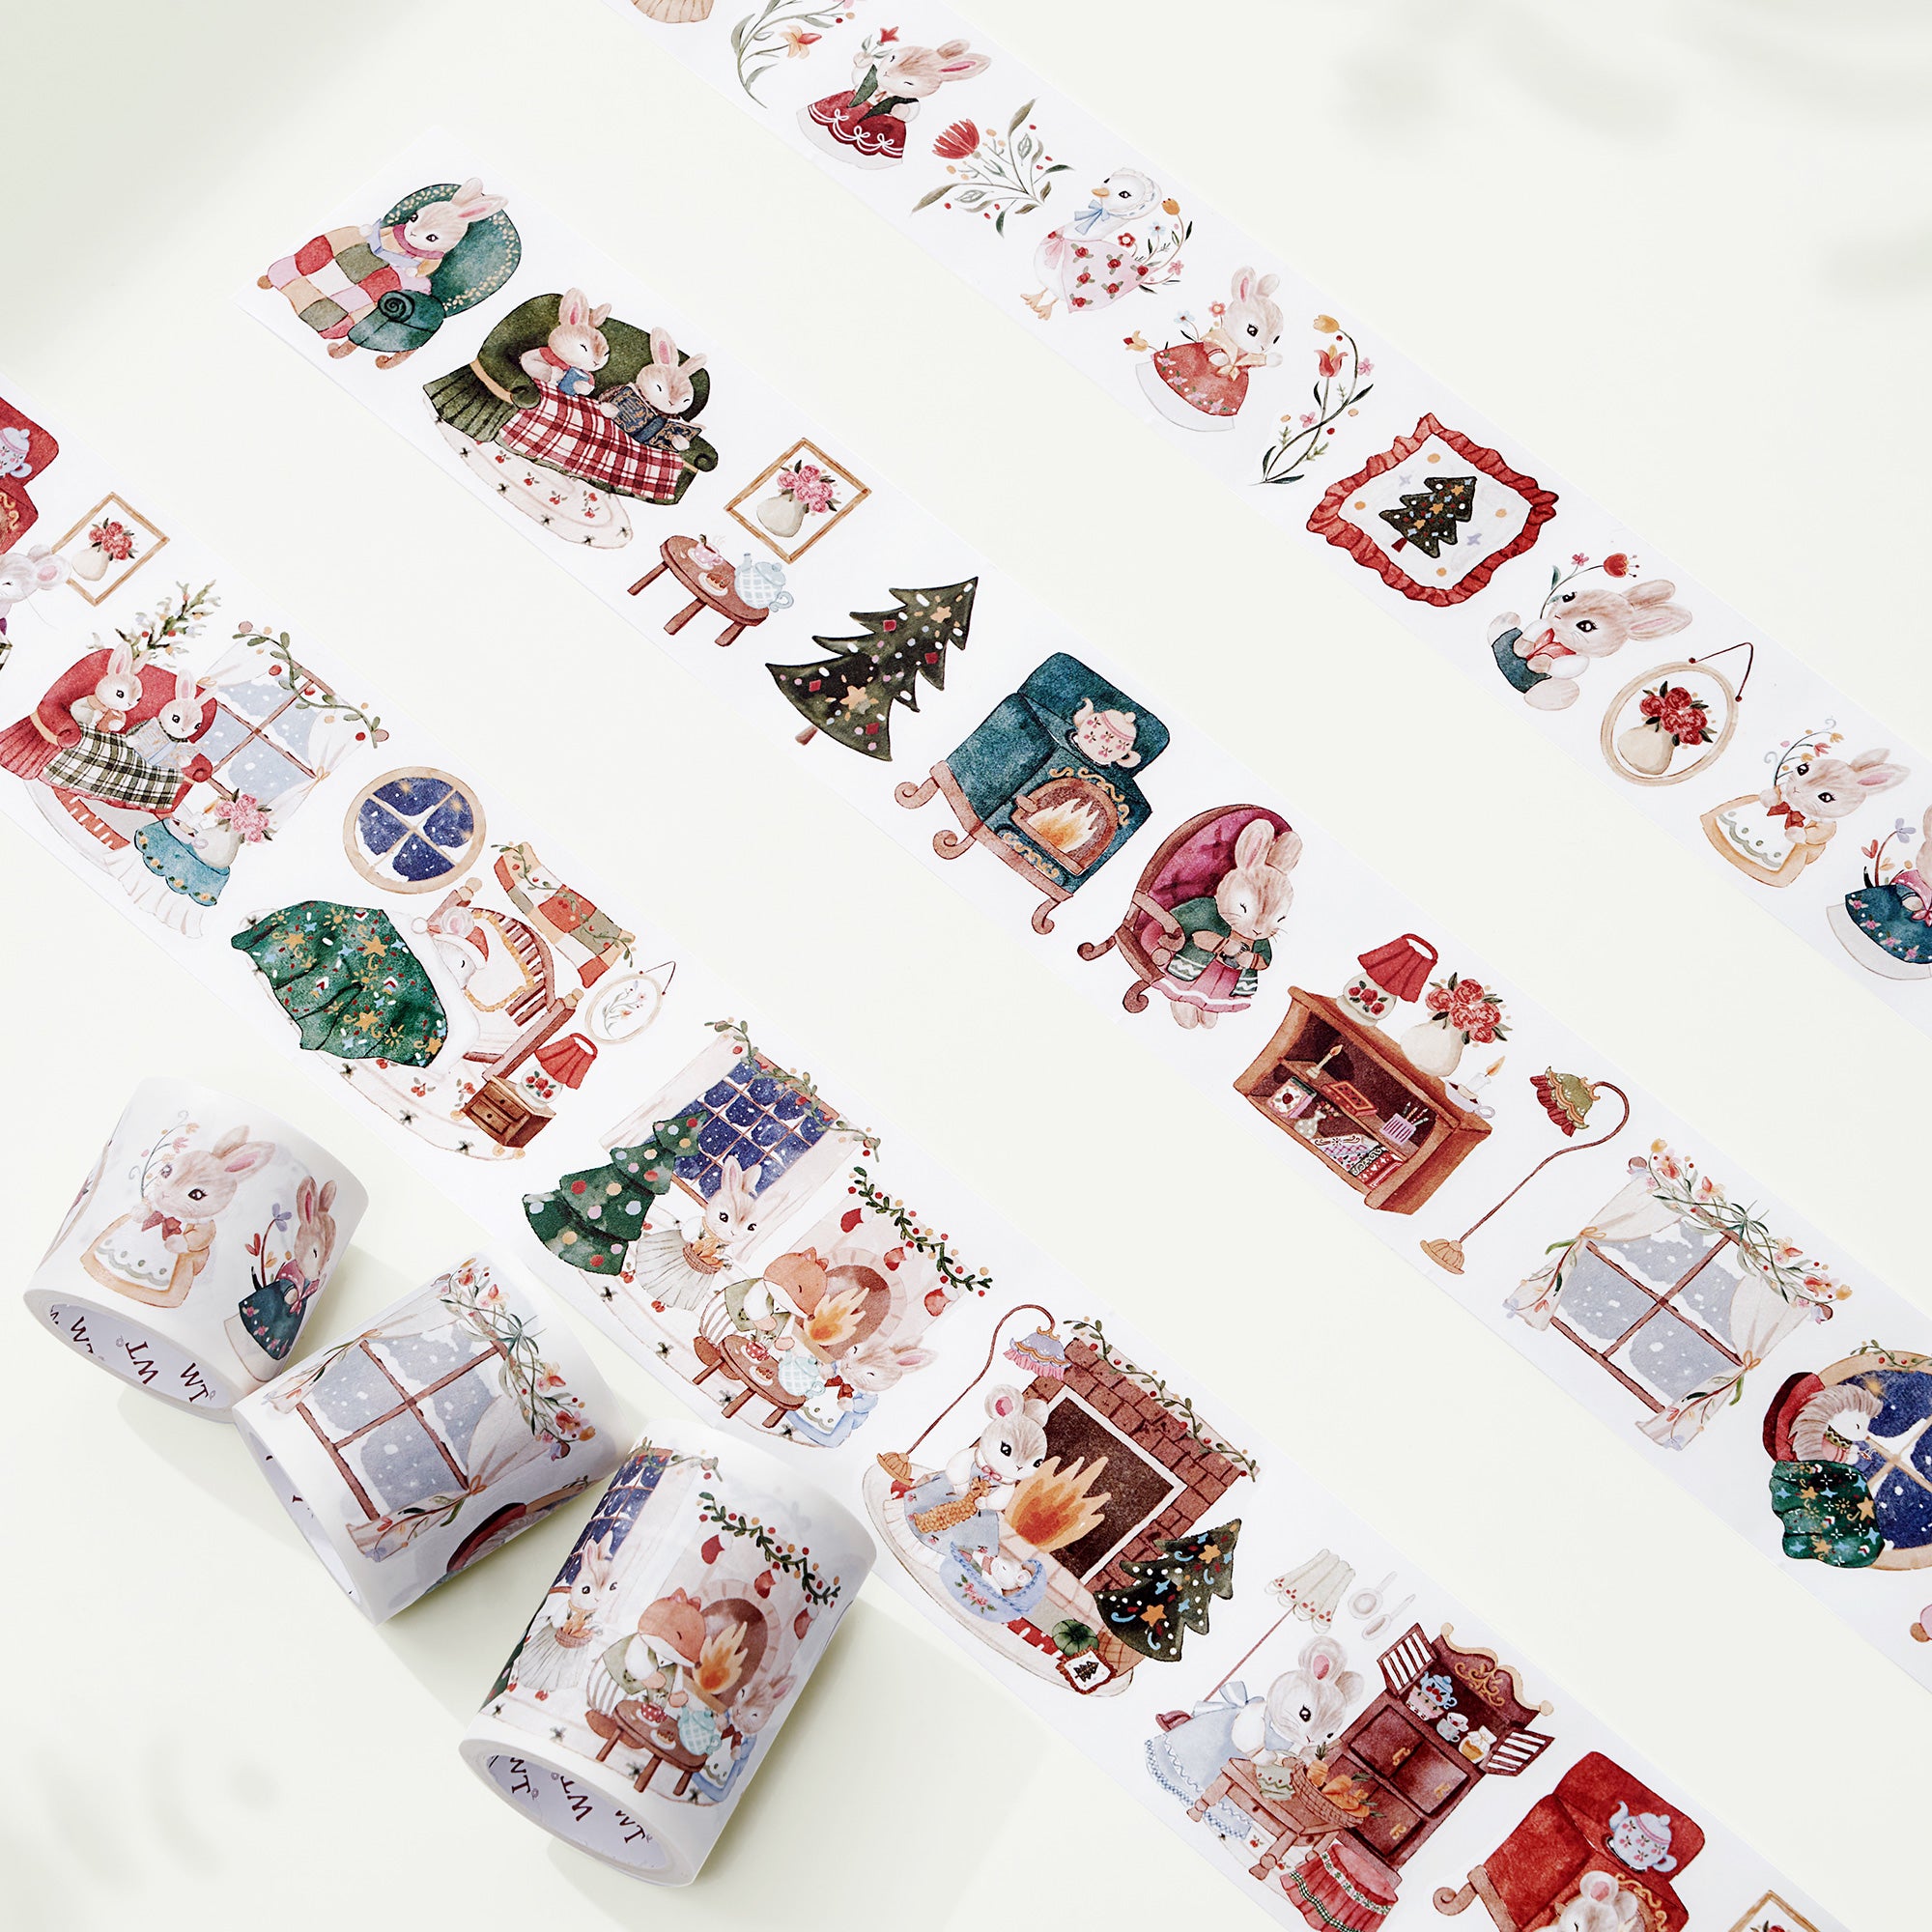 Jingle Paws Washi Tape Sticker Set | The Washi Tape Shop. Beautiful Washi and Decorative Tape For Bullet Journals, Gift Wrapping, Planner Decoration and DIY Projects